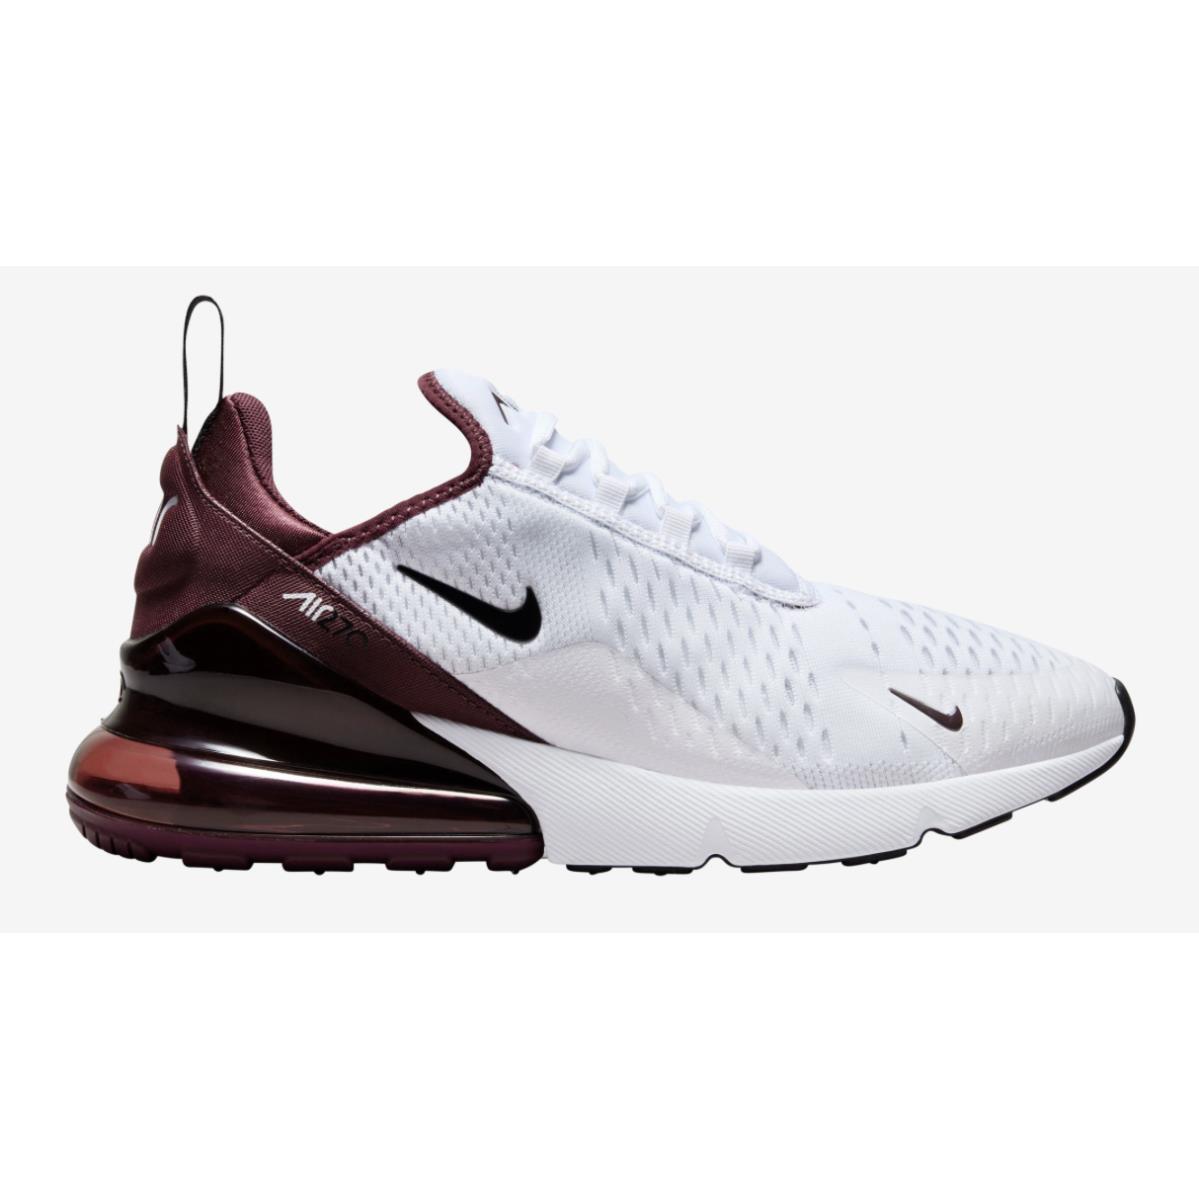 Nike Air Max 270 Men`s Casual Shoes All Colors US Sizes 7-14 Maroon/Black/White